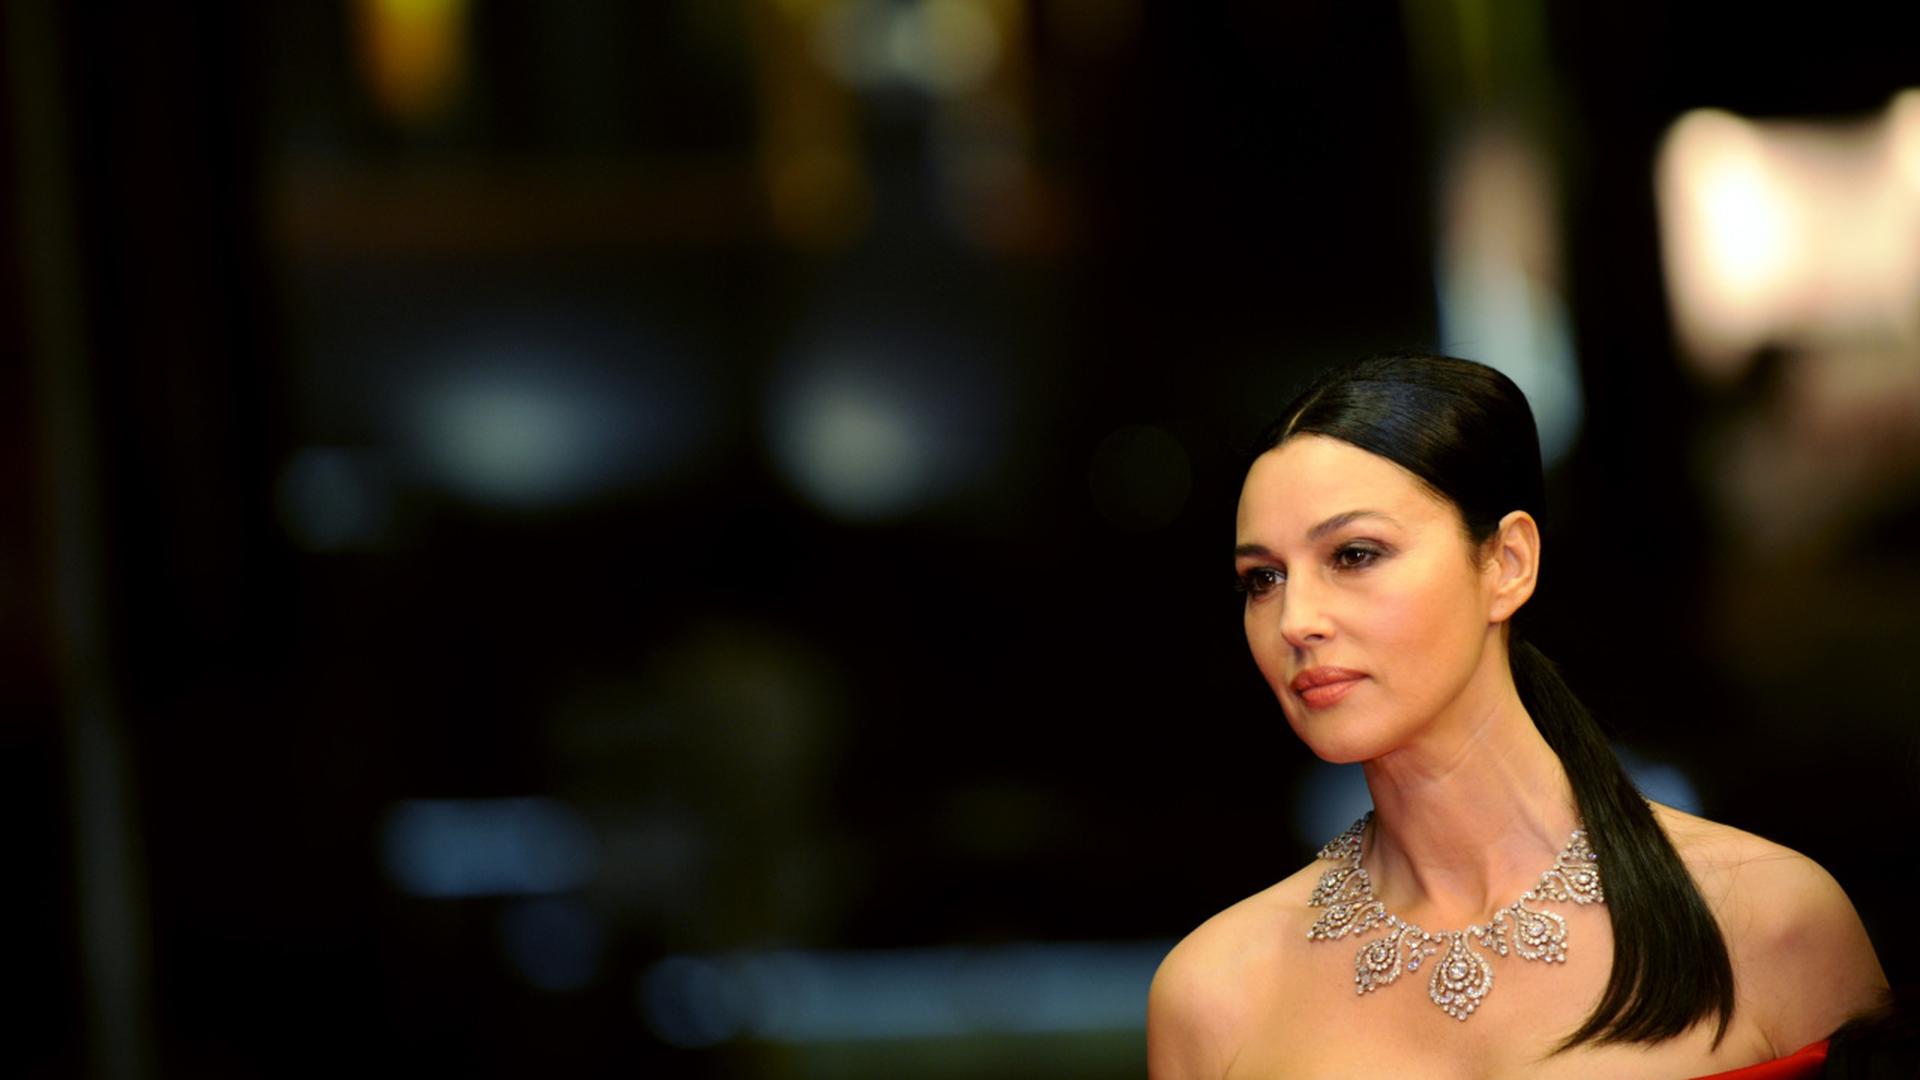 (FILES) This file photo taken on May 16, 2009 shows Italian actress Monica Bellucci posing while arriving for the screening of the movie "Ne Te Retourne Pas" (Don't Look Back) out of competition at the 62nd Cannes Film Festival. / AFP PHOTO / ANNE-CHRISTINE POUJOULAT